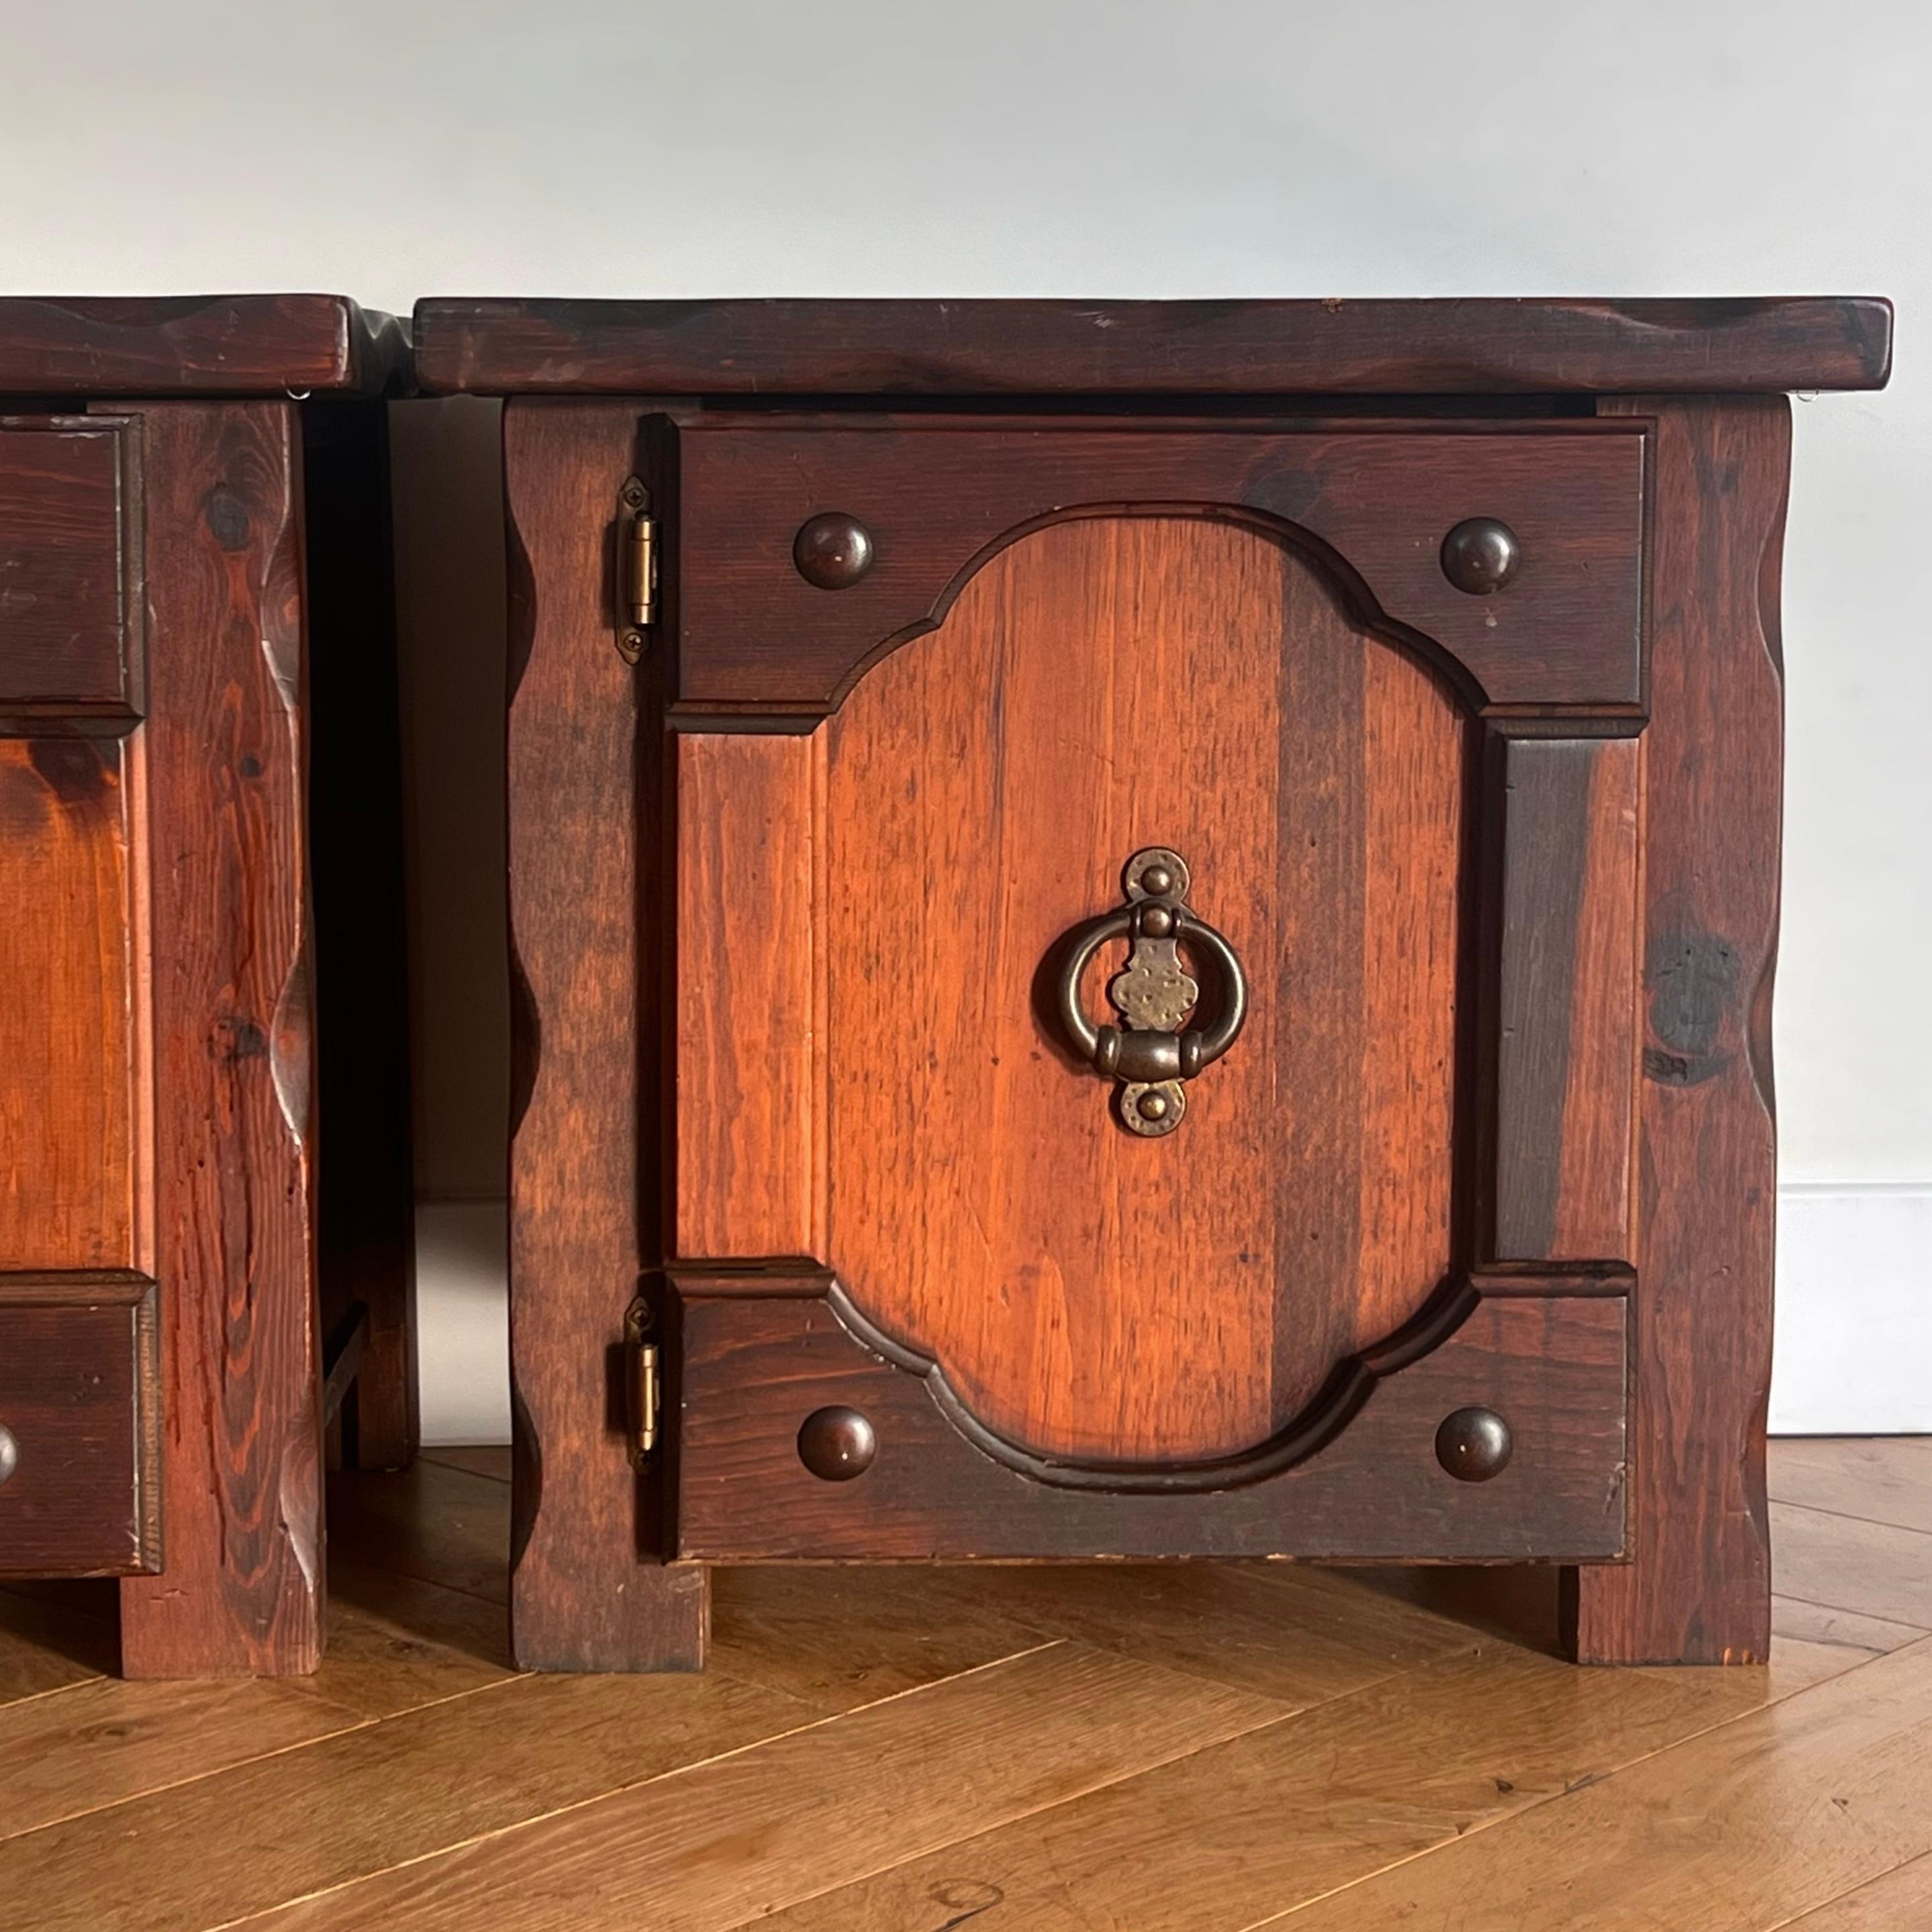 A pair of craftsman nightstands with mission and gothic sensibilities, circa early 1970s. Beautiful wood grain and iron accents and hardware. In great condition with only minor signs of age including some nicks to wood as shown in photos. Pick up in